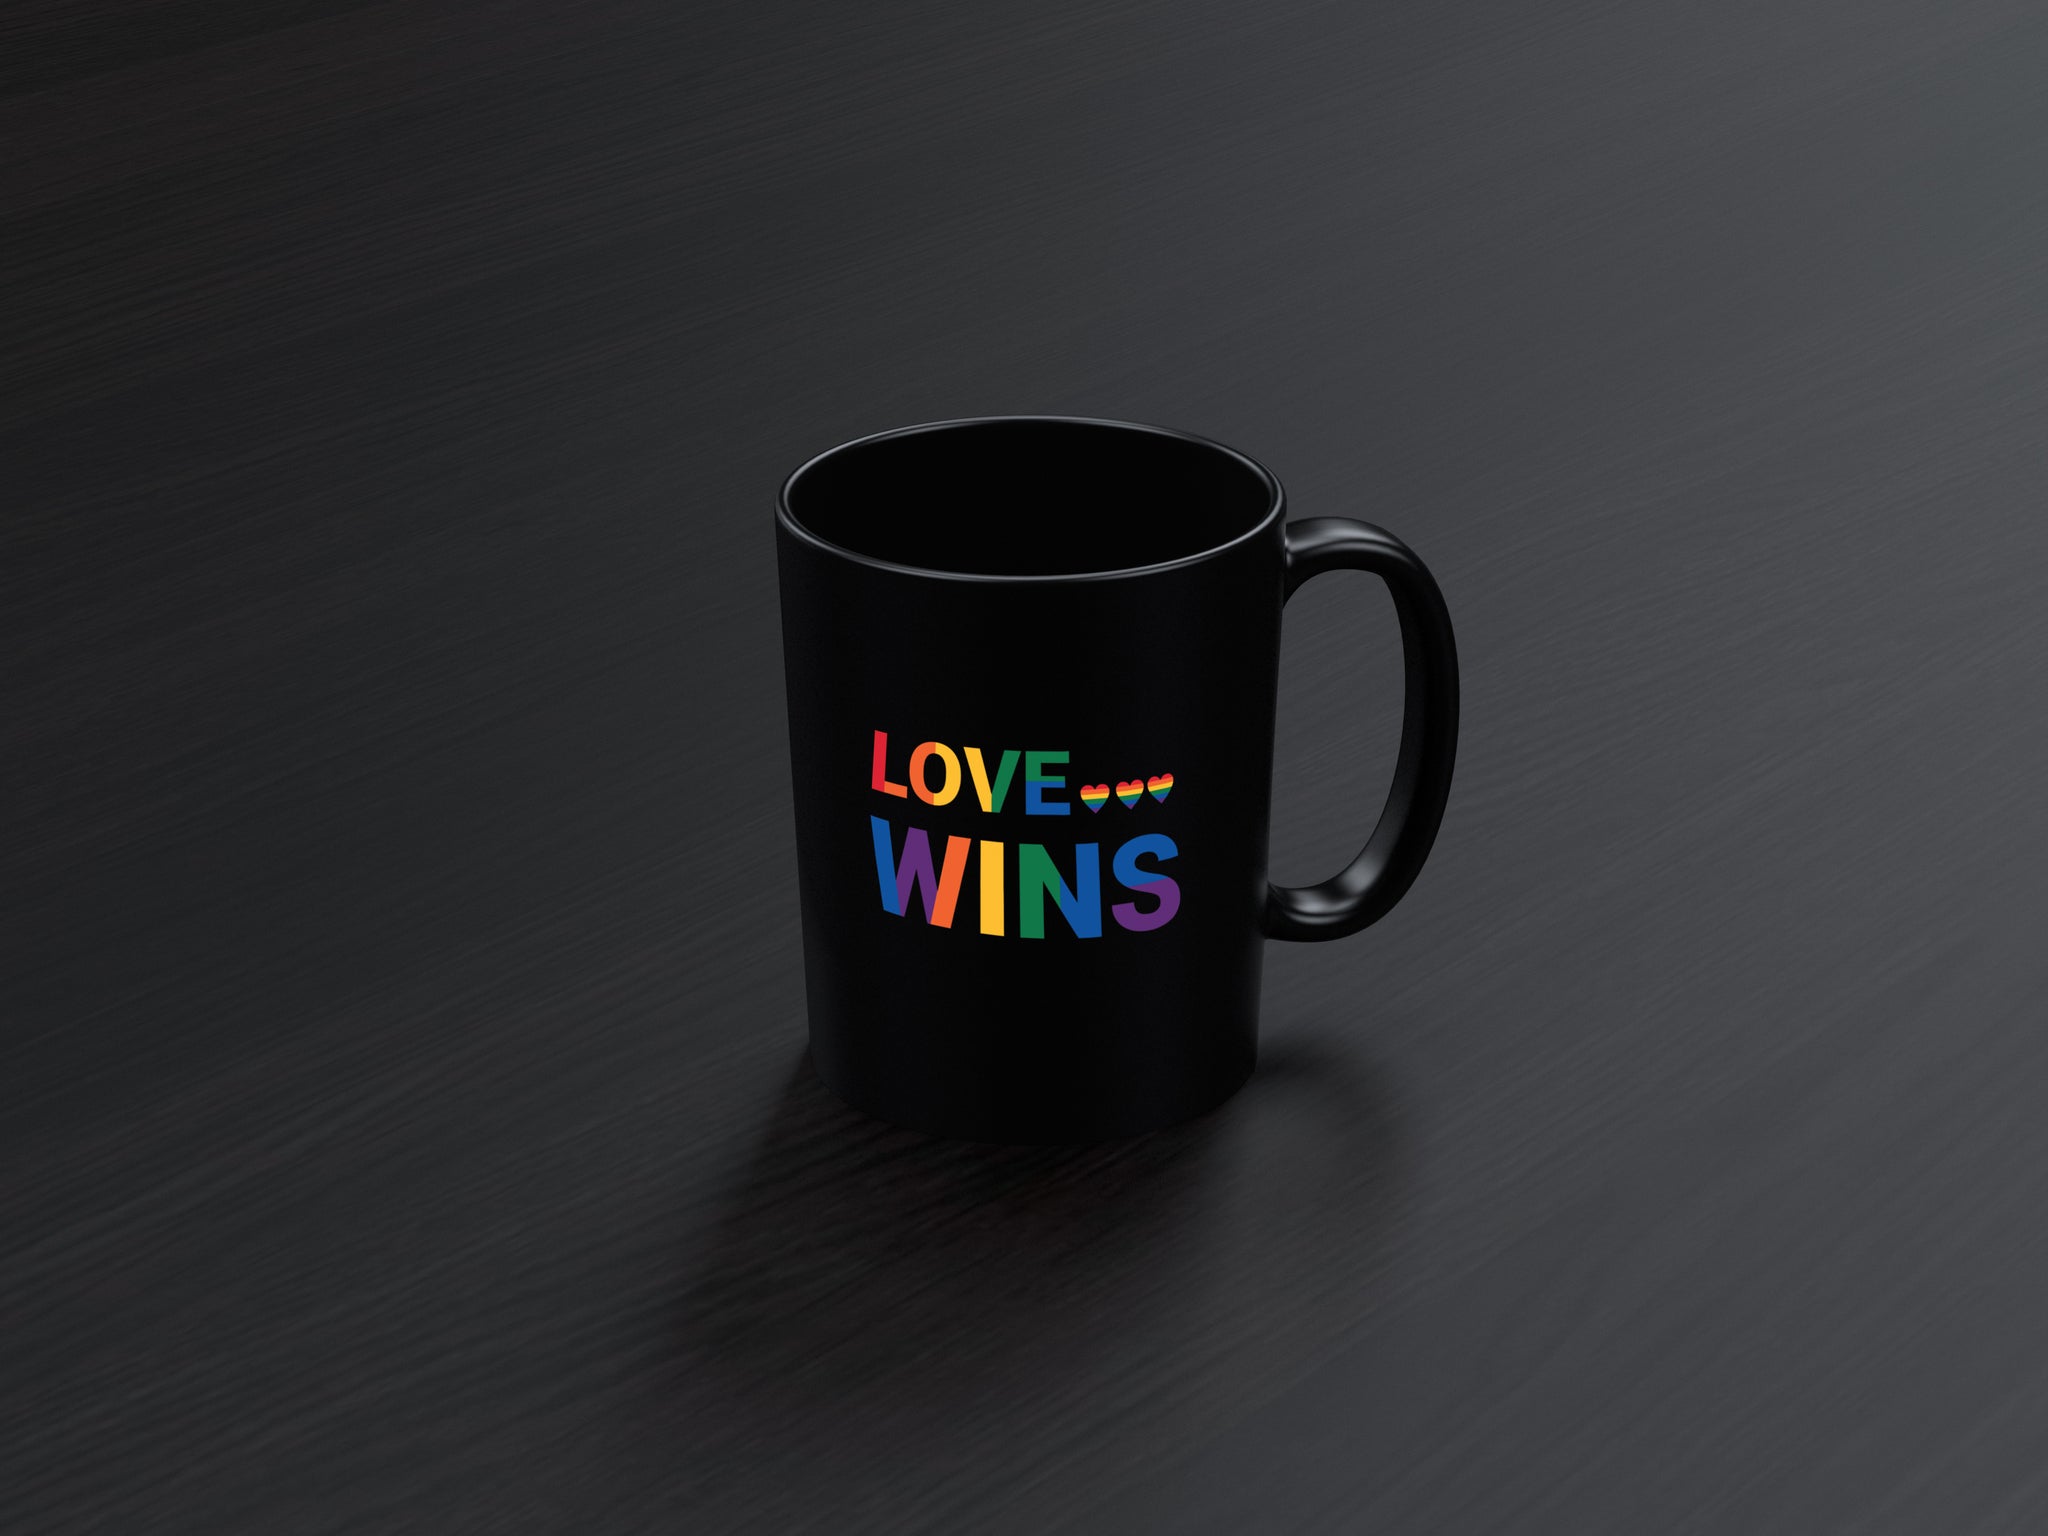 Skitongifts Funny Ceramic Coffee Mug For Birthday, Mother's Day, Father's Day, Christmas Love Wins For Lgbt